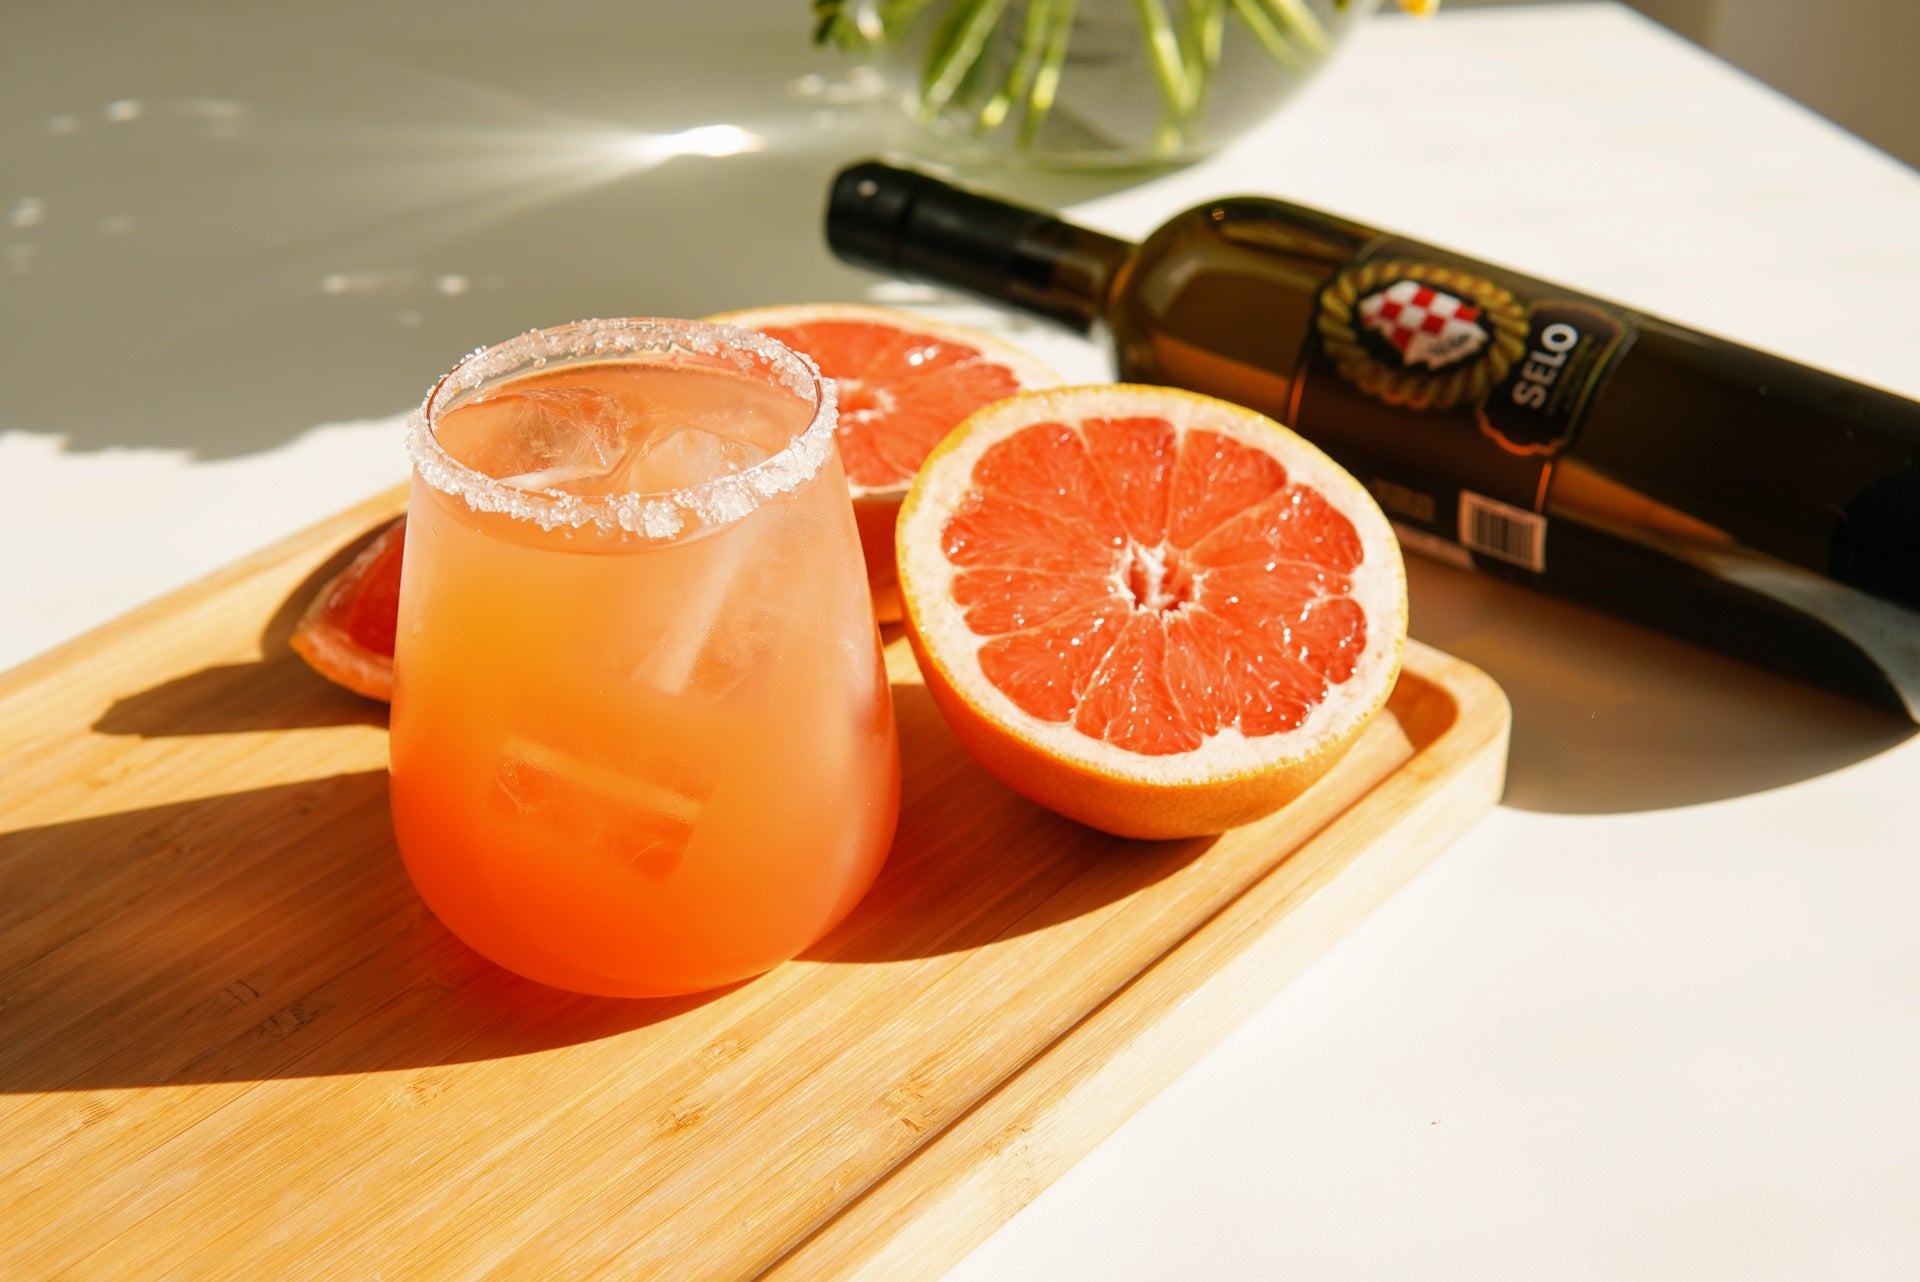 Grapefruit cocktail with a salted rim, a tantalizing mix of flavors combining the refreshing tartness of grapefruit with the savory hint of salt, perfect for summer enjoyment.